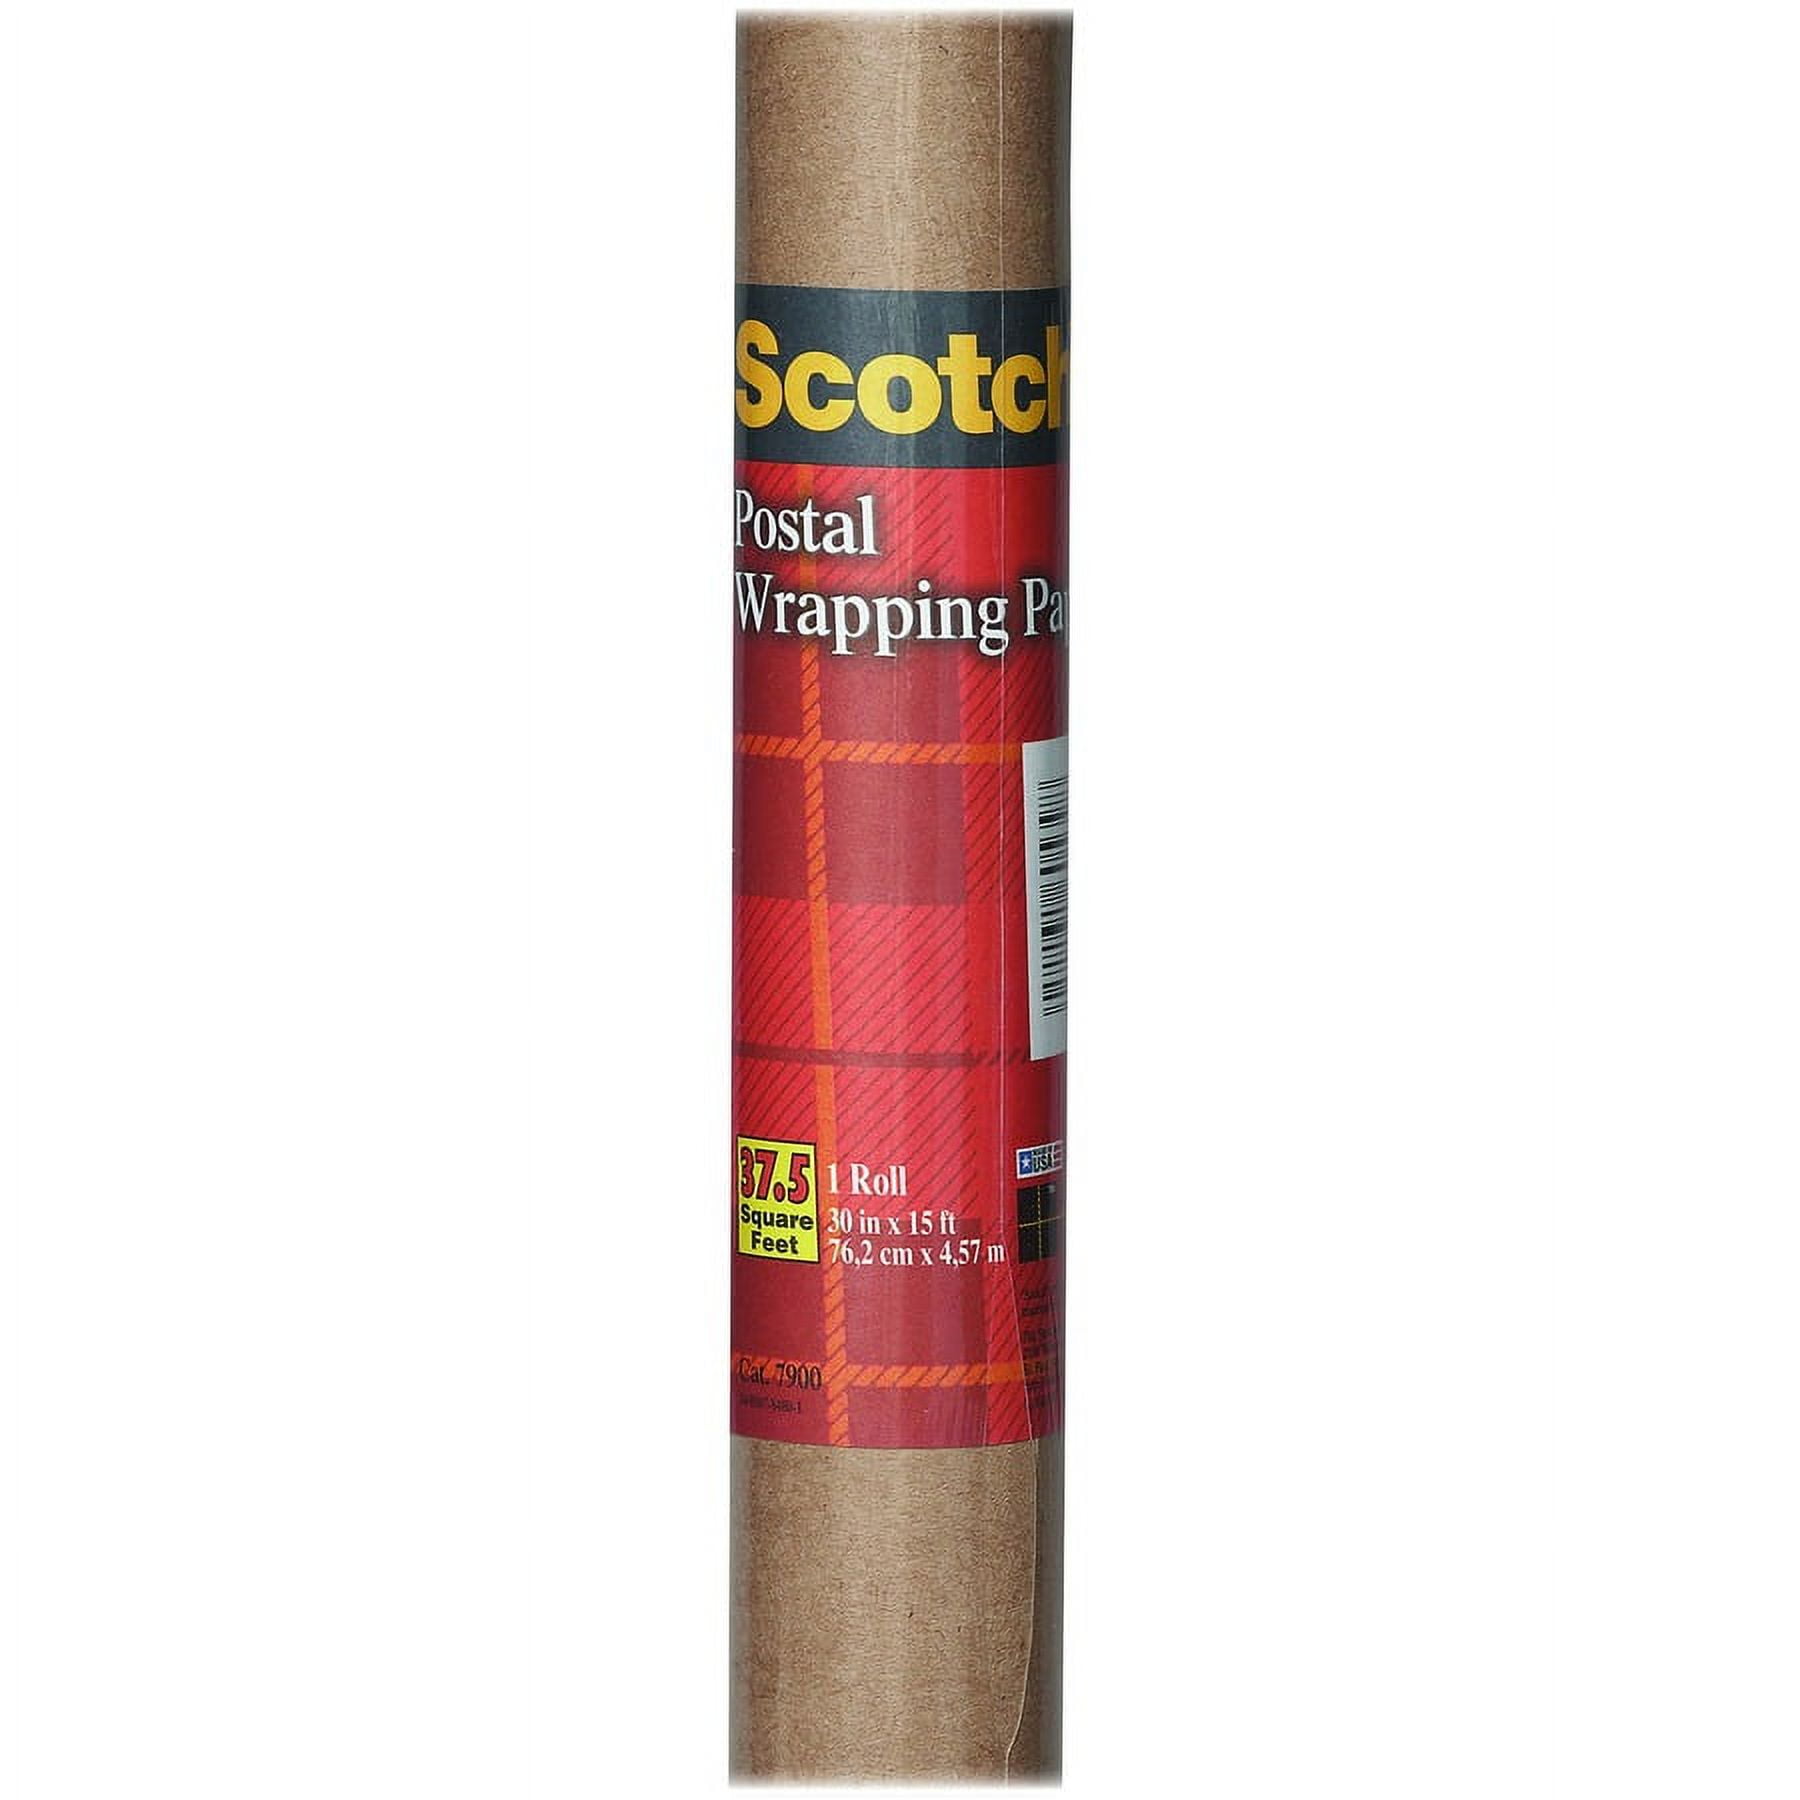 Large Brown Kraft Paper Roll - 36 x 1200 (100 ft) - Made in USA - Ideal for Gift Wrapping, Packing, Moving, Postal, Shipping, Parcel, Wall Art